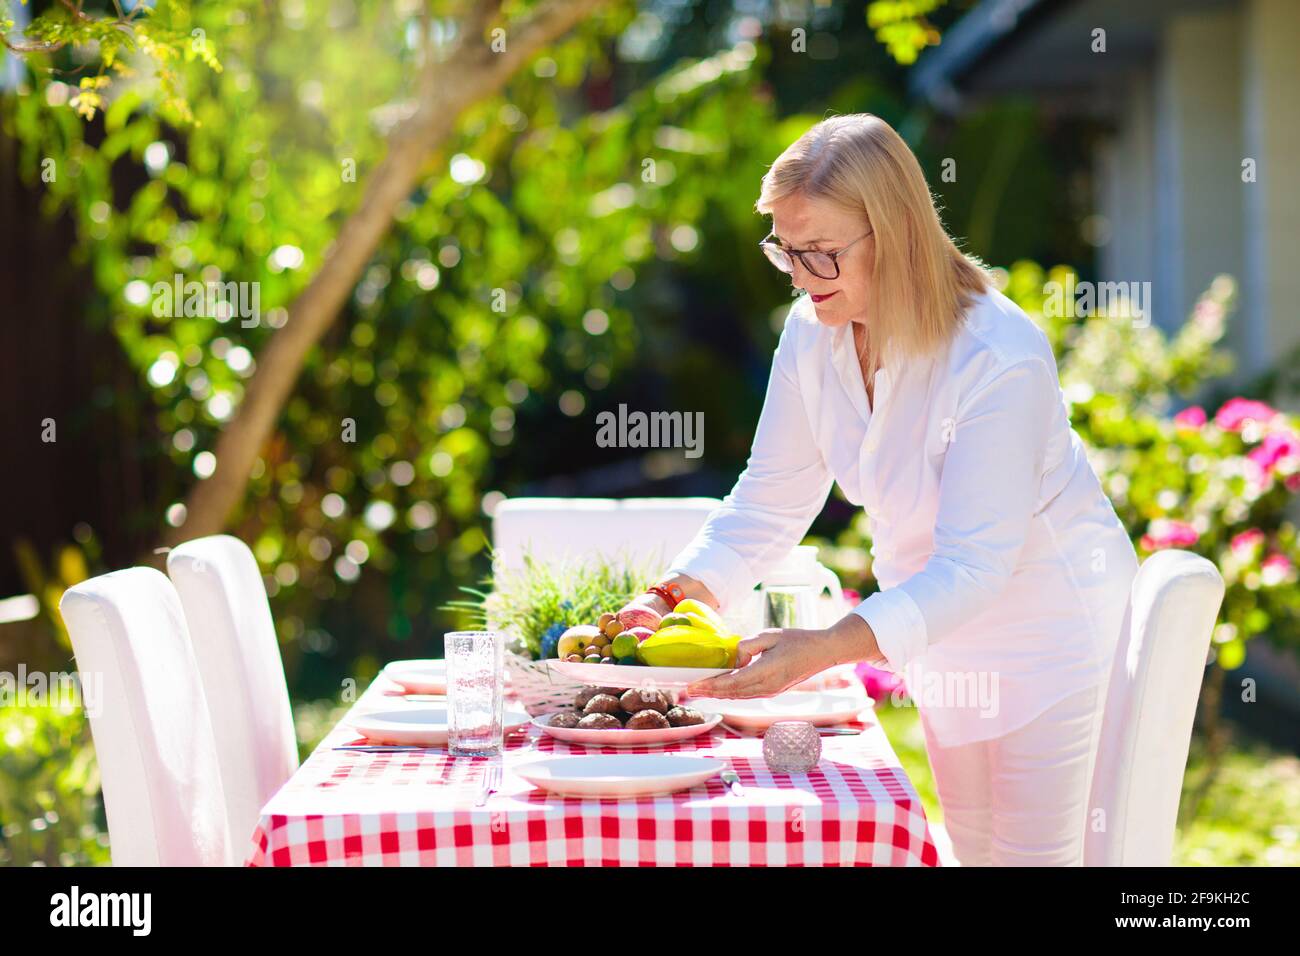 Woman setting table outdoors. Garden summer fun. BBQ in sunny backyard. Senior lady at lunch. Party decoration. Female with fruit outdoor. Stock Photo